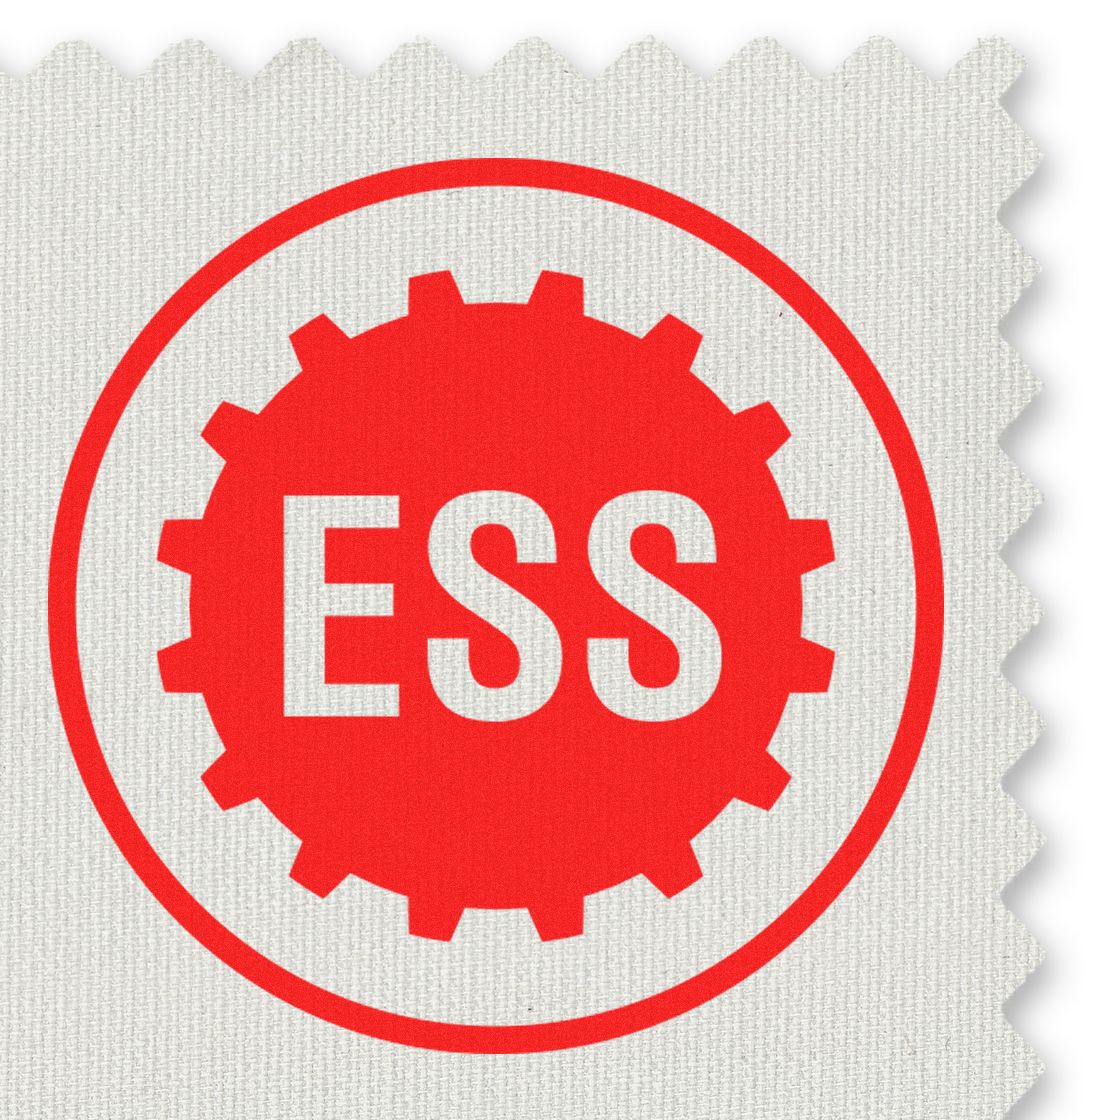 Stamping Solutions: Innovative Office Stamp Ideas for a Productive Workplace Feature Image